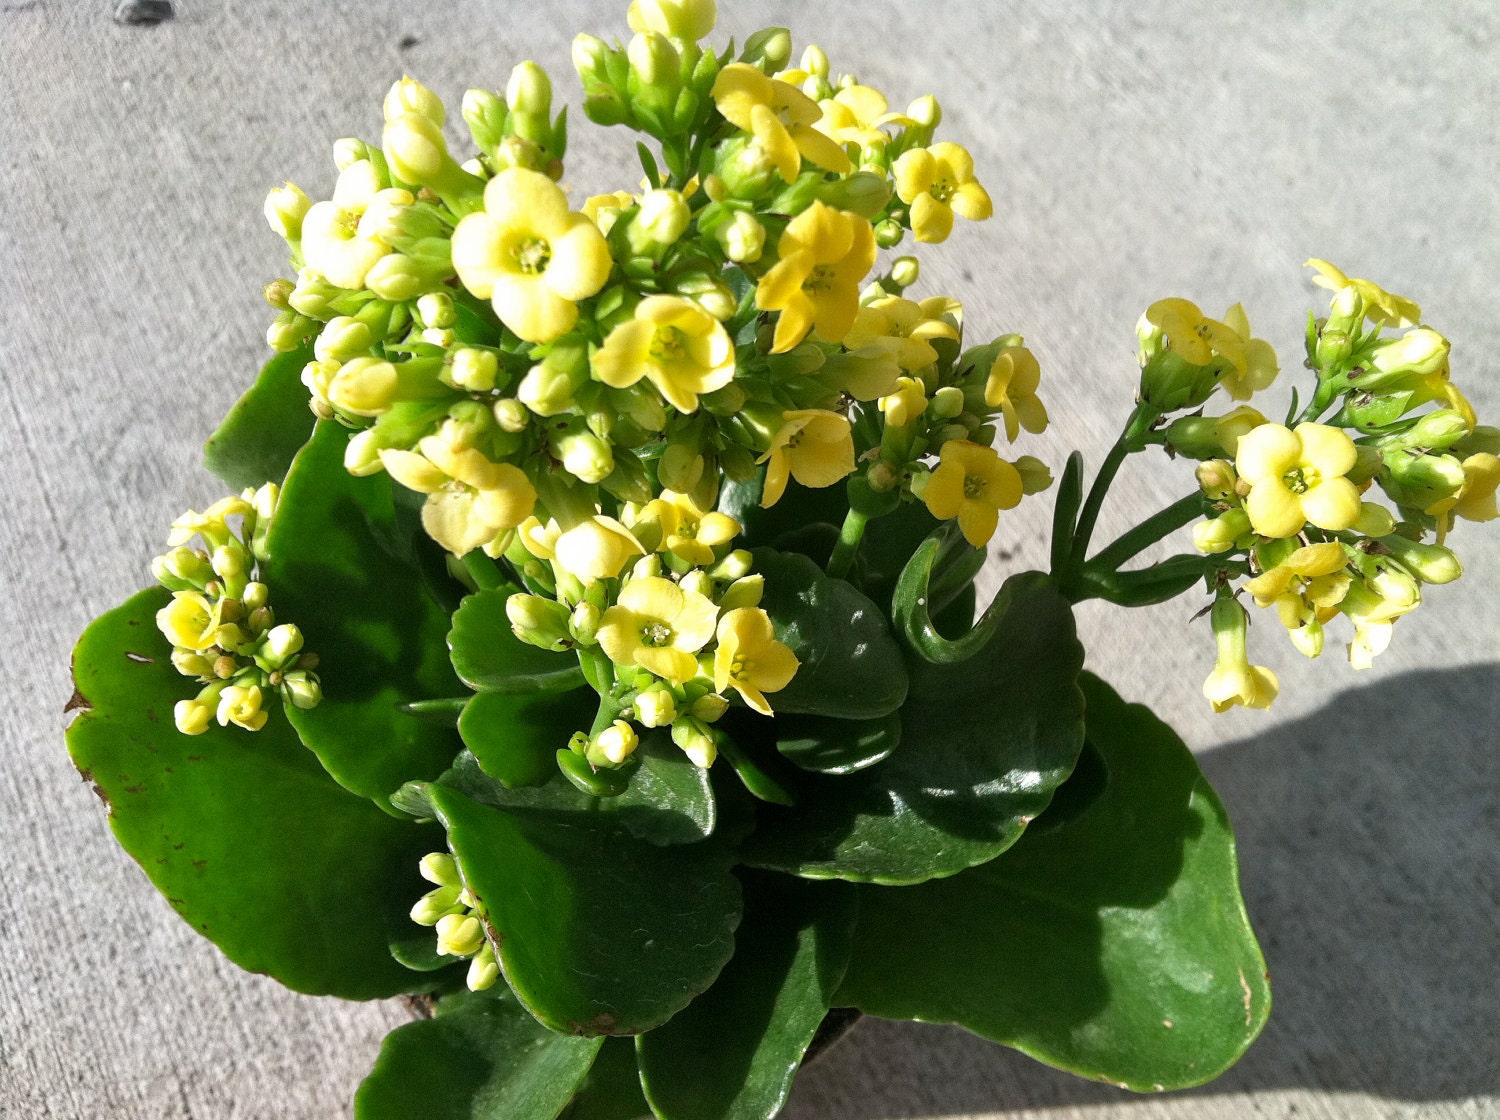 NEW 804 SUCCULENT PLANT  WITH SMALL  YELLOW FLOWERS  